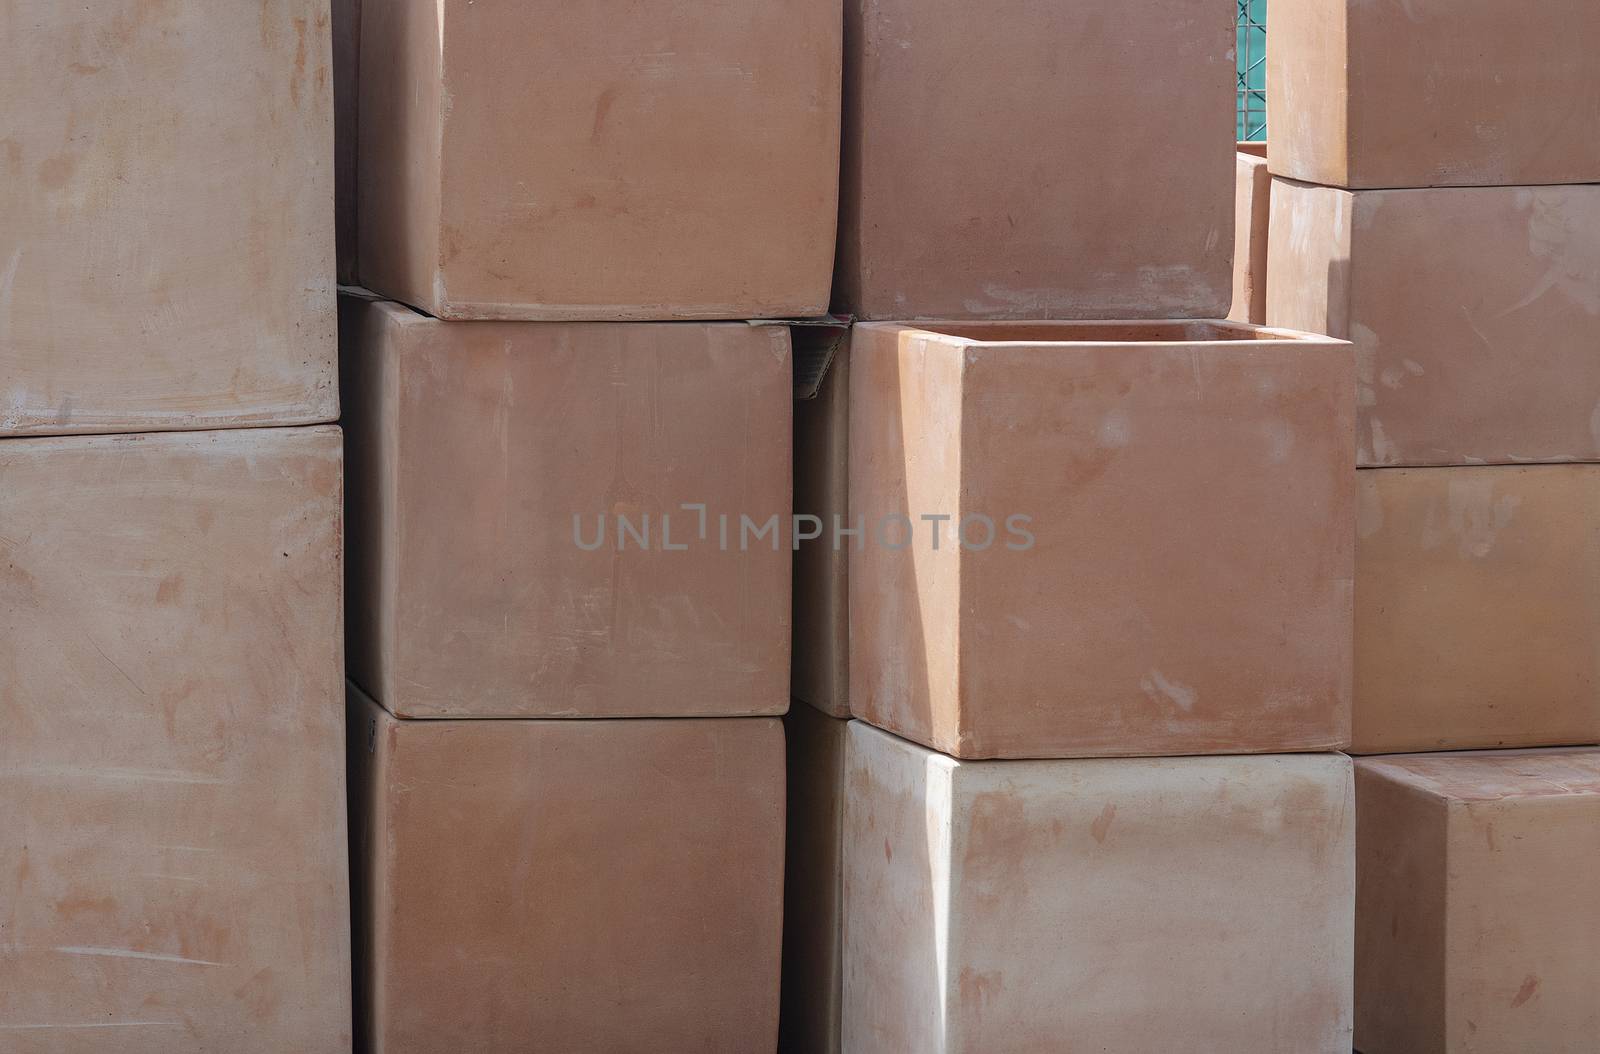 Rustic terracotta pots cube shape piled up on display closeup full frame